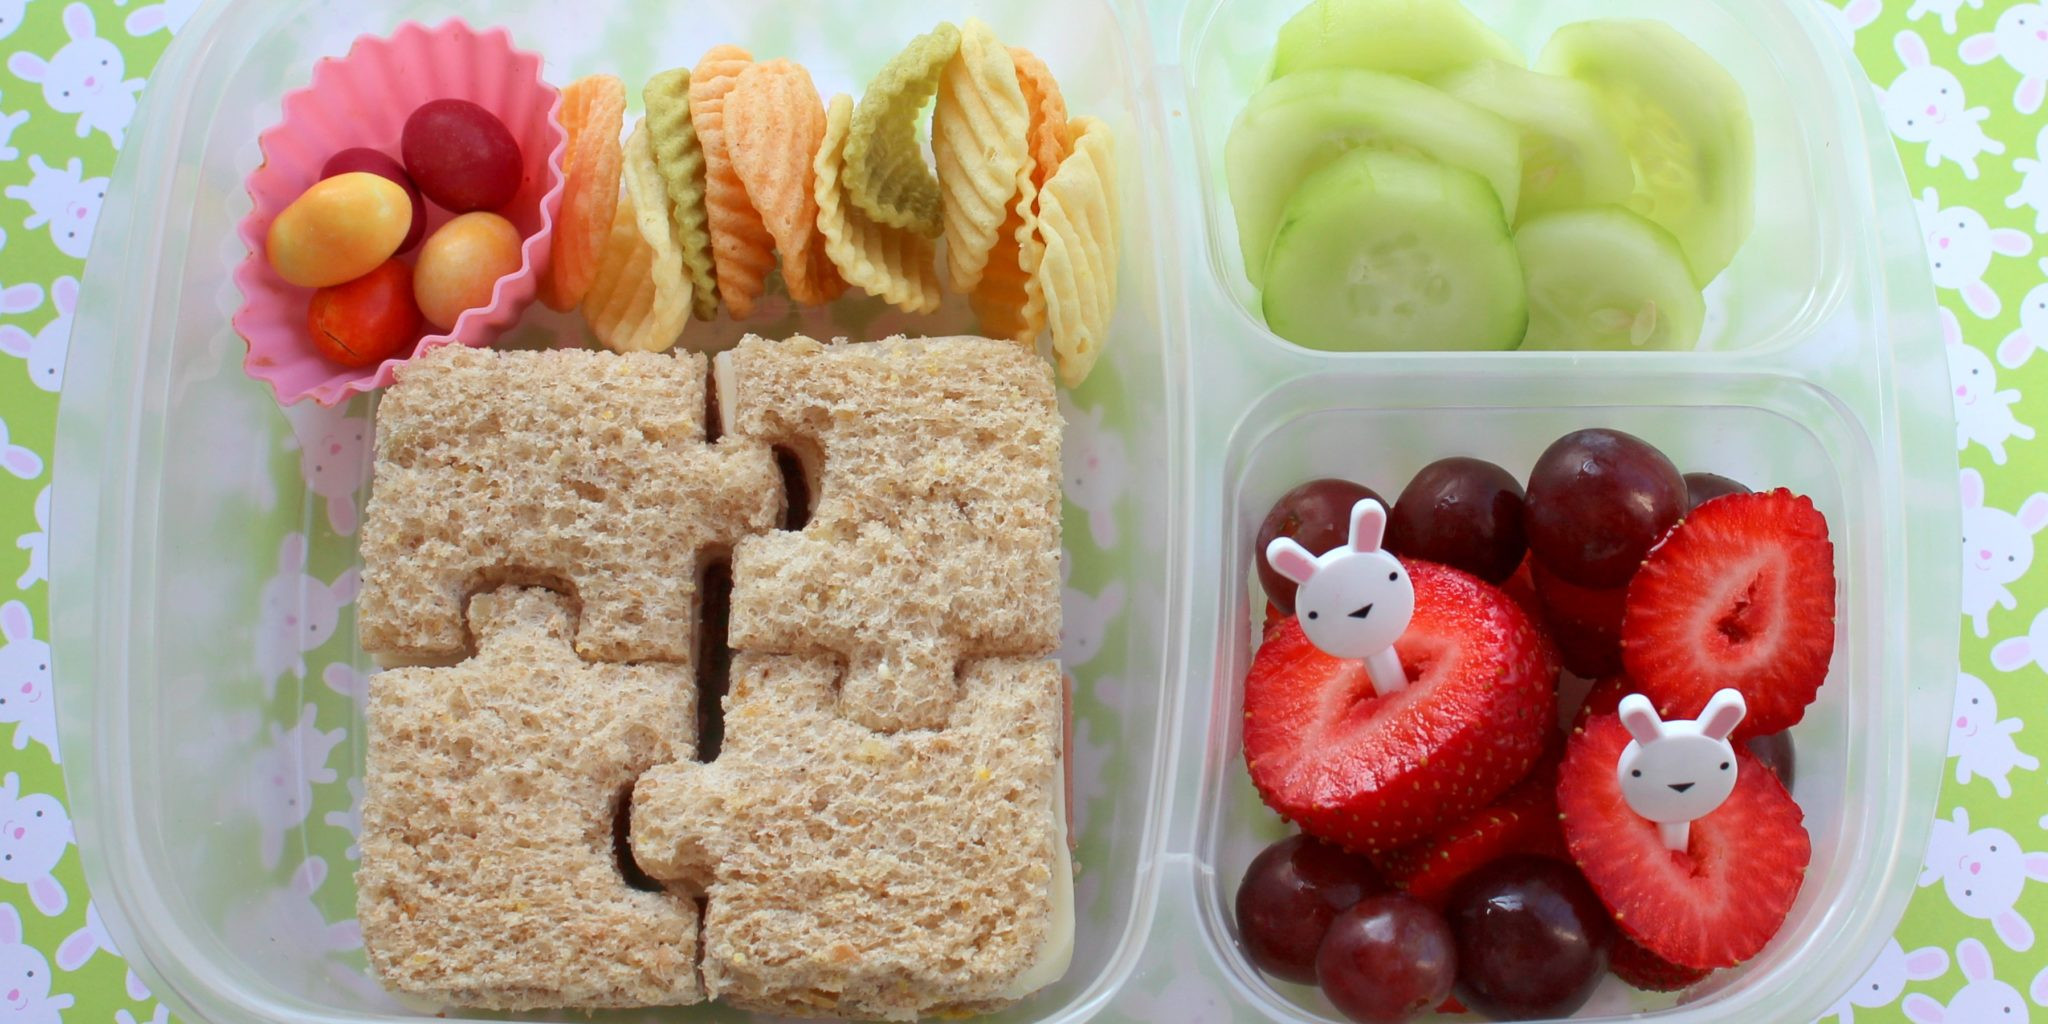 Healthy Lunch Snacks For Kids
 Healthy Lunchbox Ideas